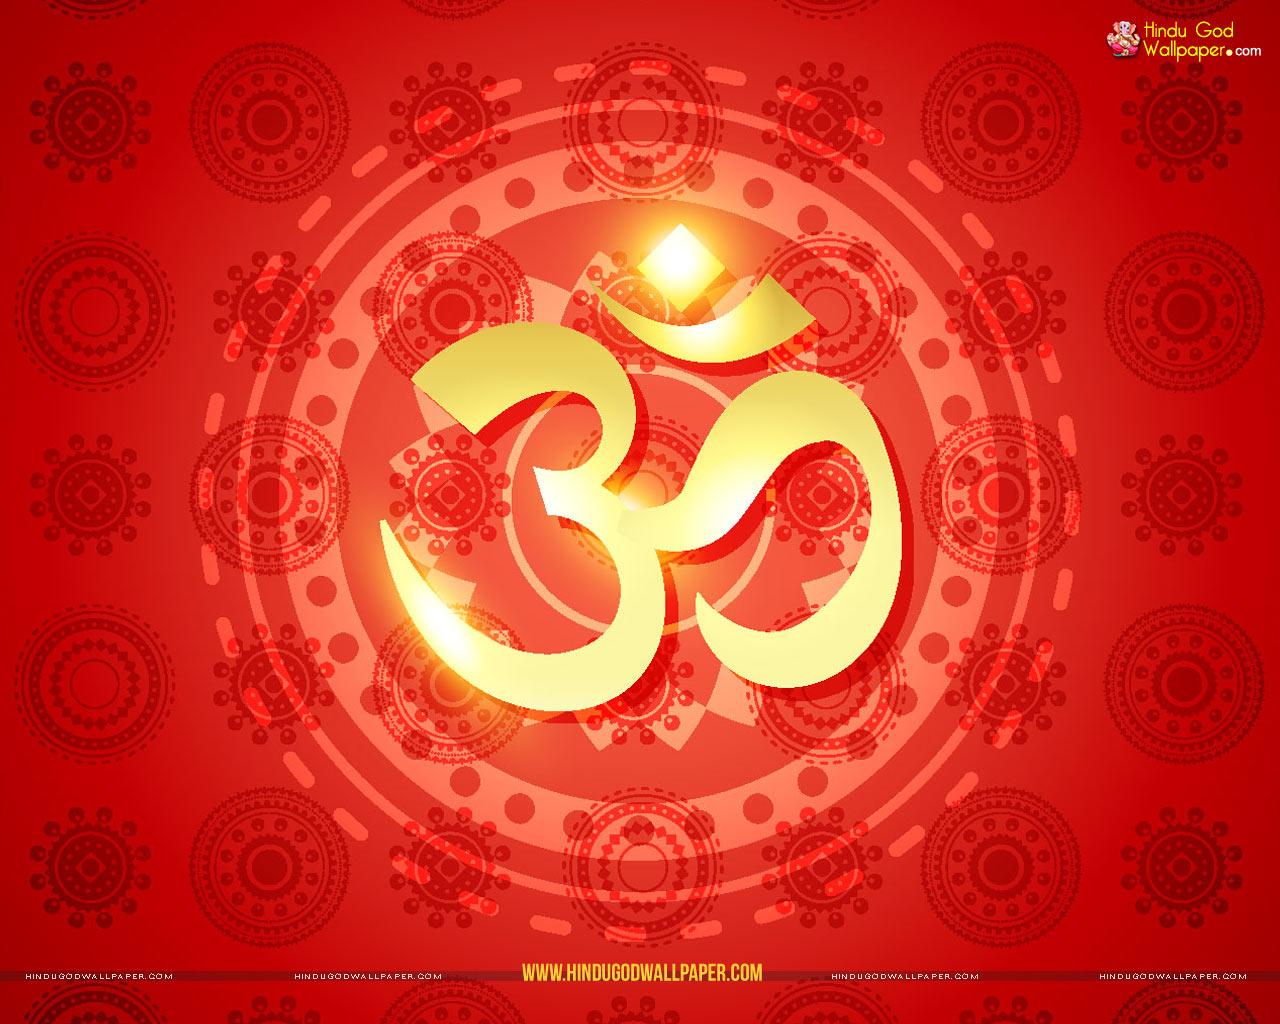 1280 x 1024 · jpeg - Download Om Images Wallpapers Gallery